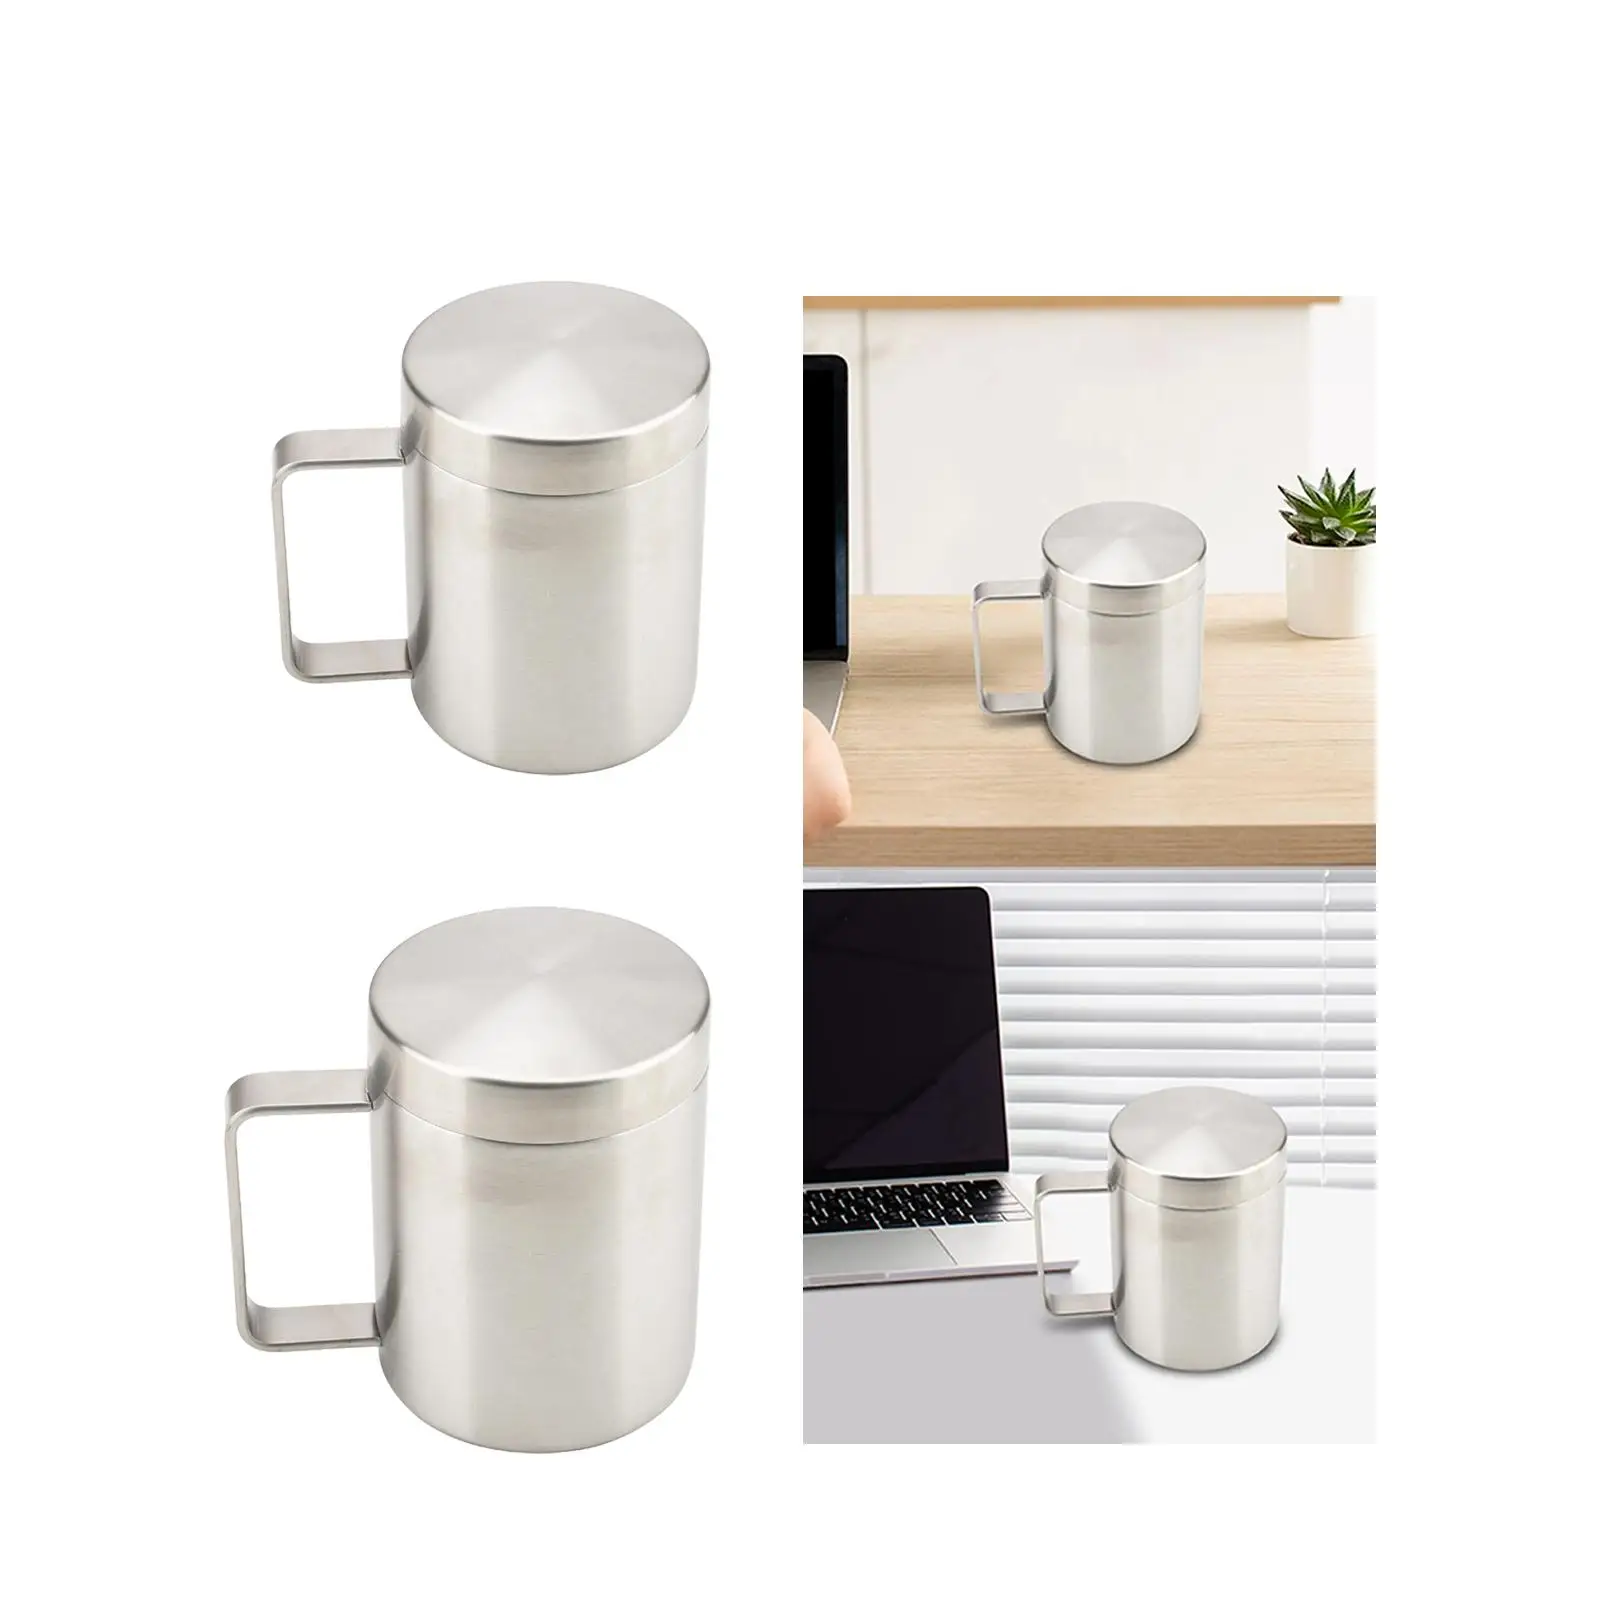 Stainless Steel Mug Housewarming Gifts Drinking Cup Portable Beverage Cup Travel Tumbler for Lounge Home Bar Office Trip